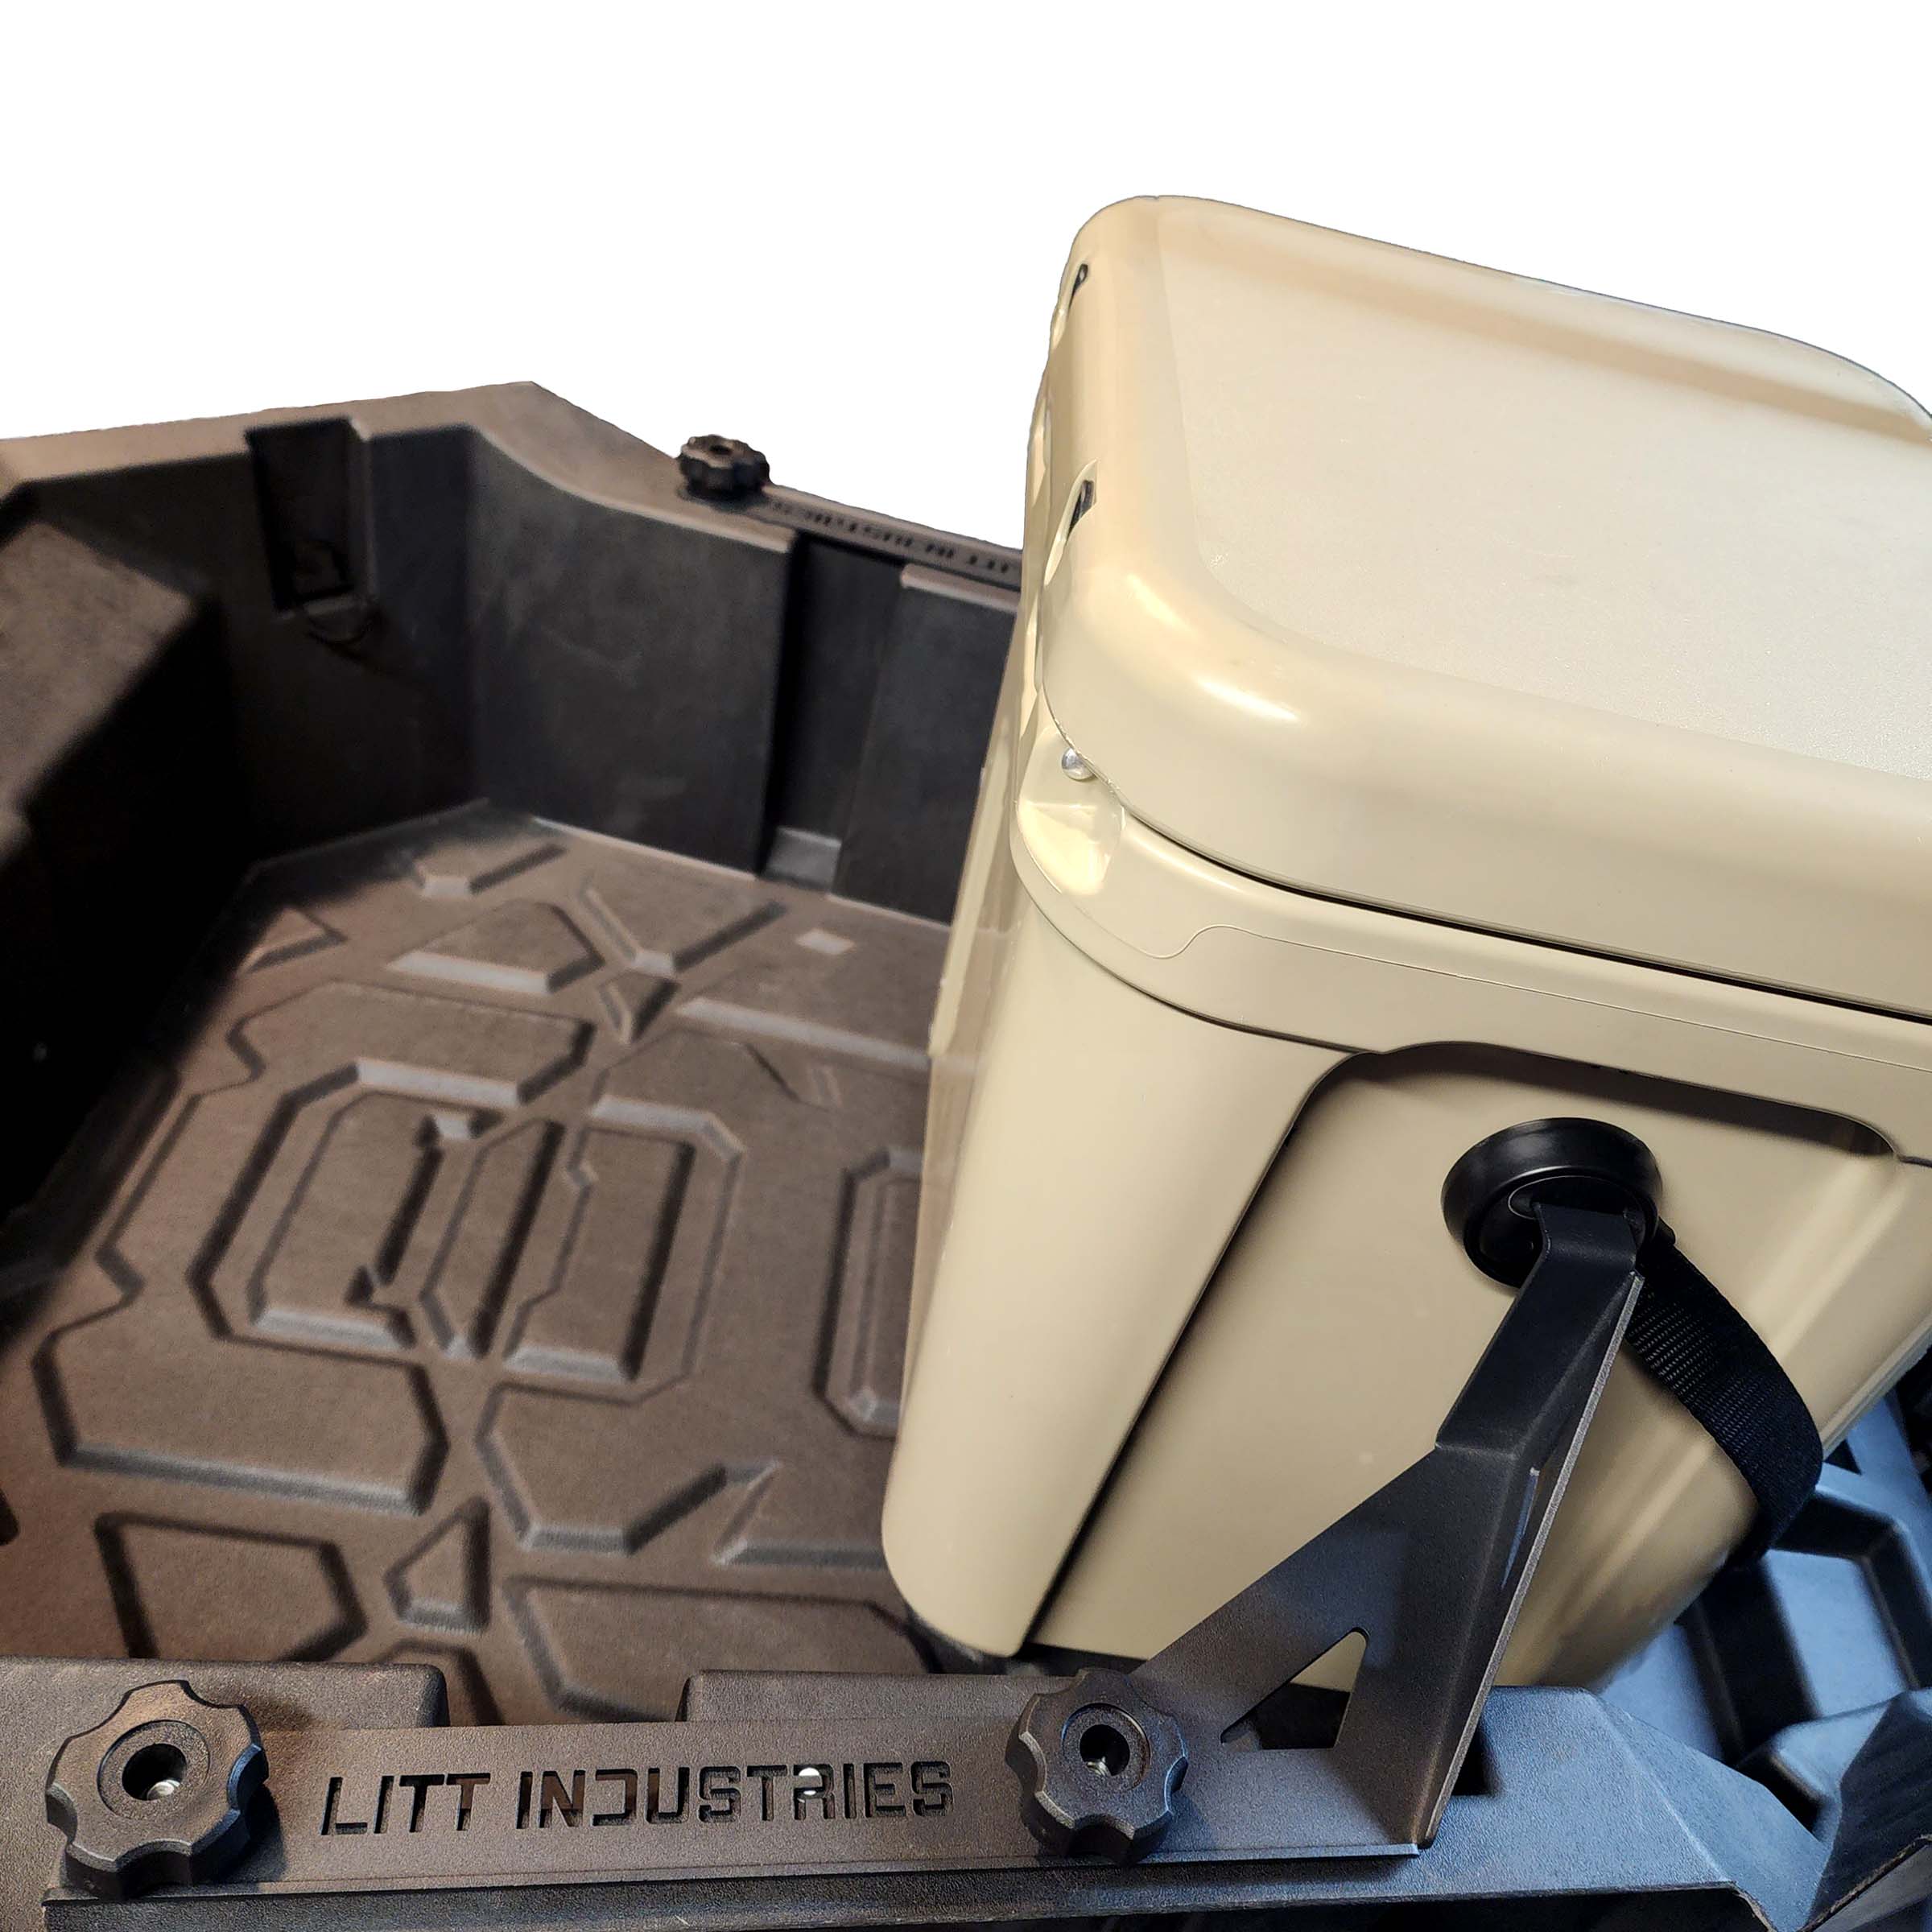 Litt Industries Yeti 24qt Roadie Cooler Mount for Polaris RZR PRO R Brackets to hold your cooler in place